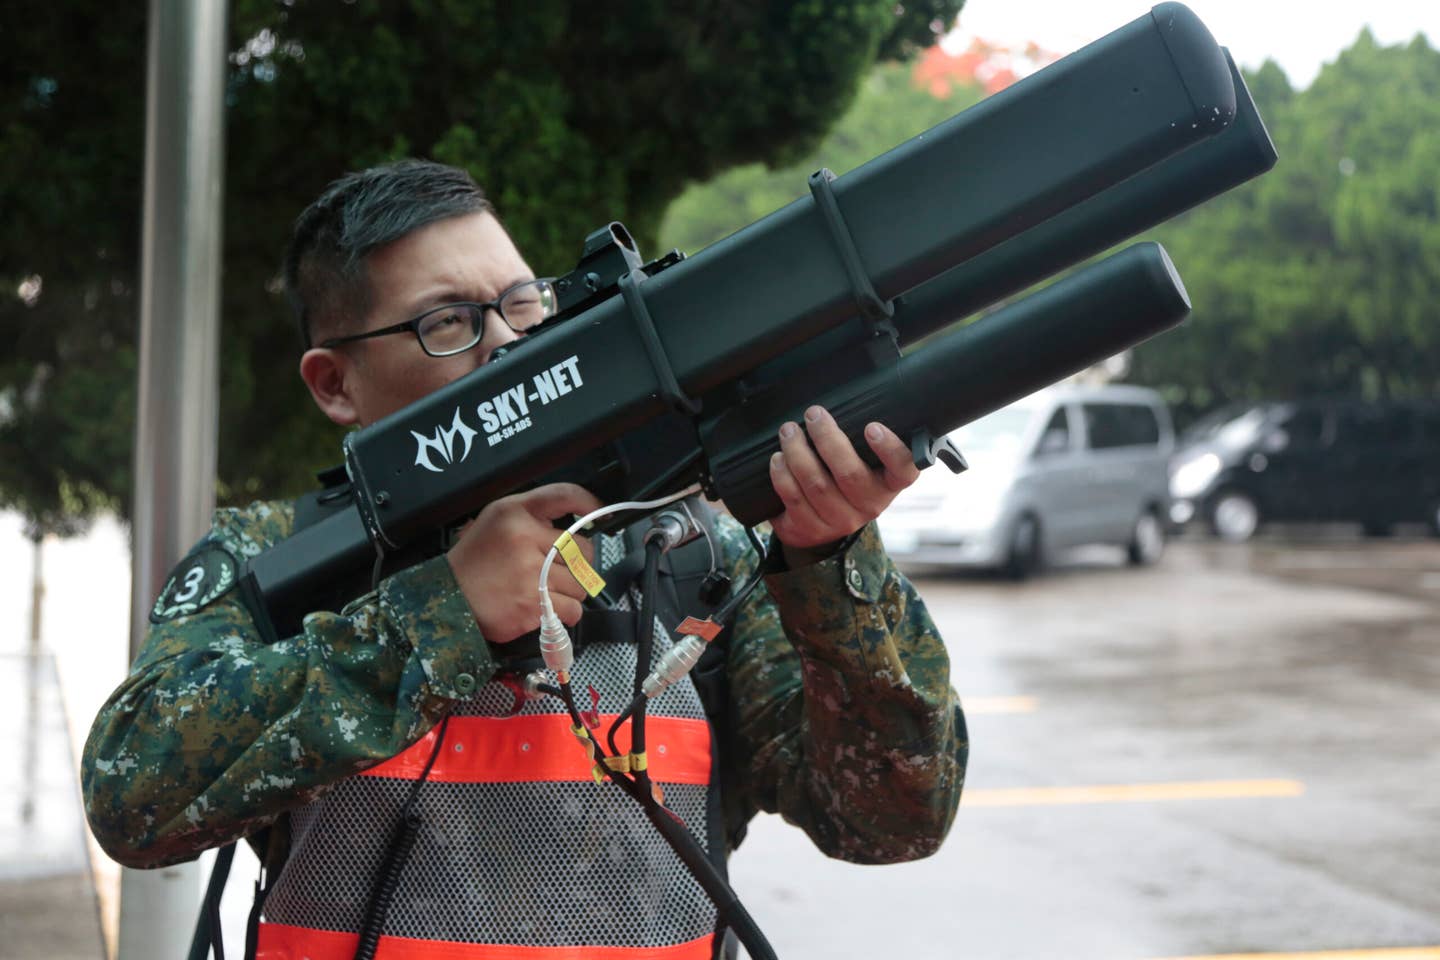 A <a href="https://anti-drones.net/">Sky Net</a> anti-drone gun of the Republic of China Air Force during an anti-invasion drill in Chang-Hua, Taiwan, in May 2019. <em>Photo by Patrick Aventurier/Getty Images</em>